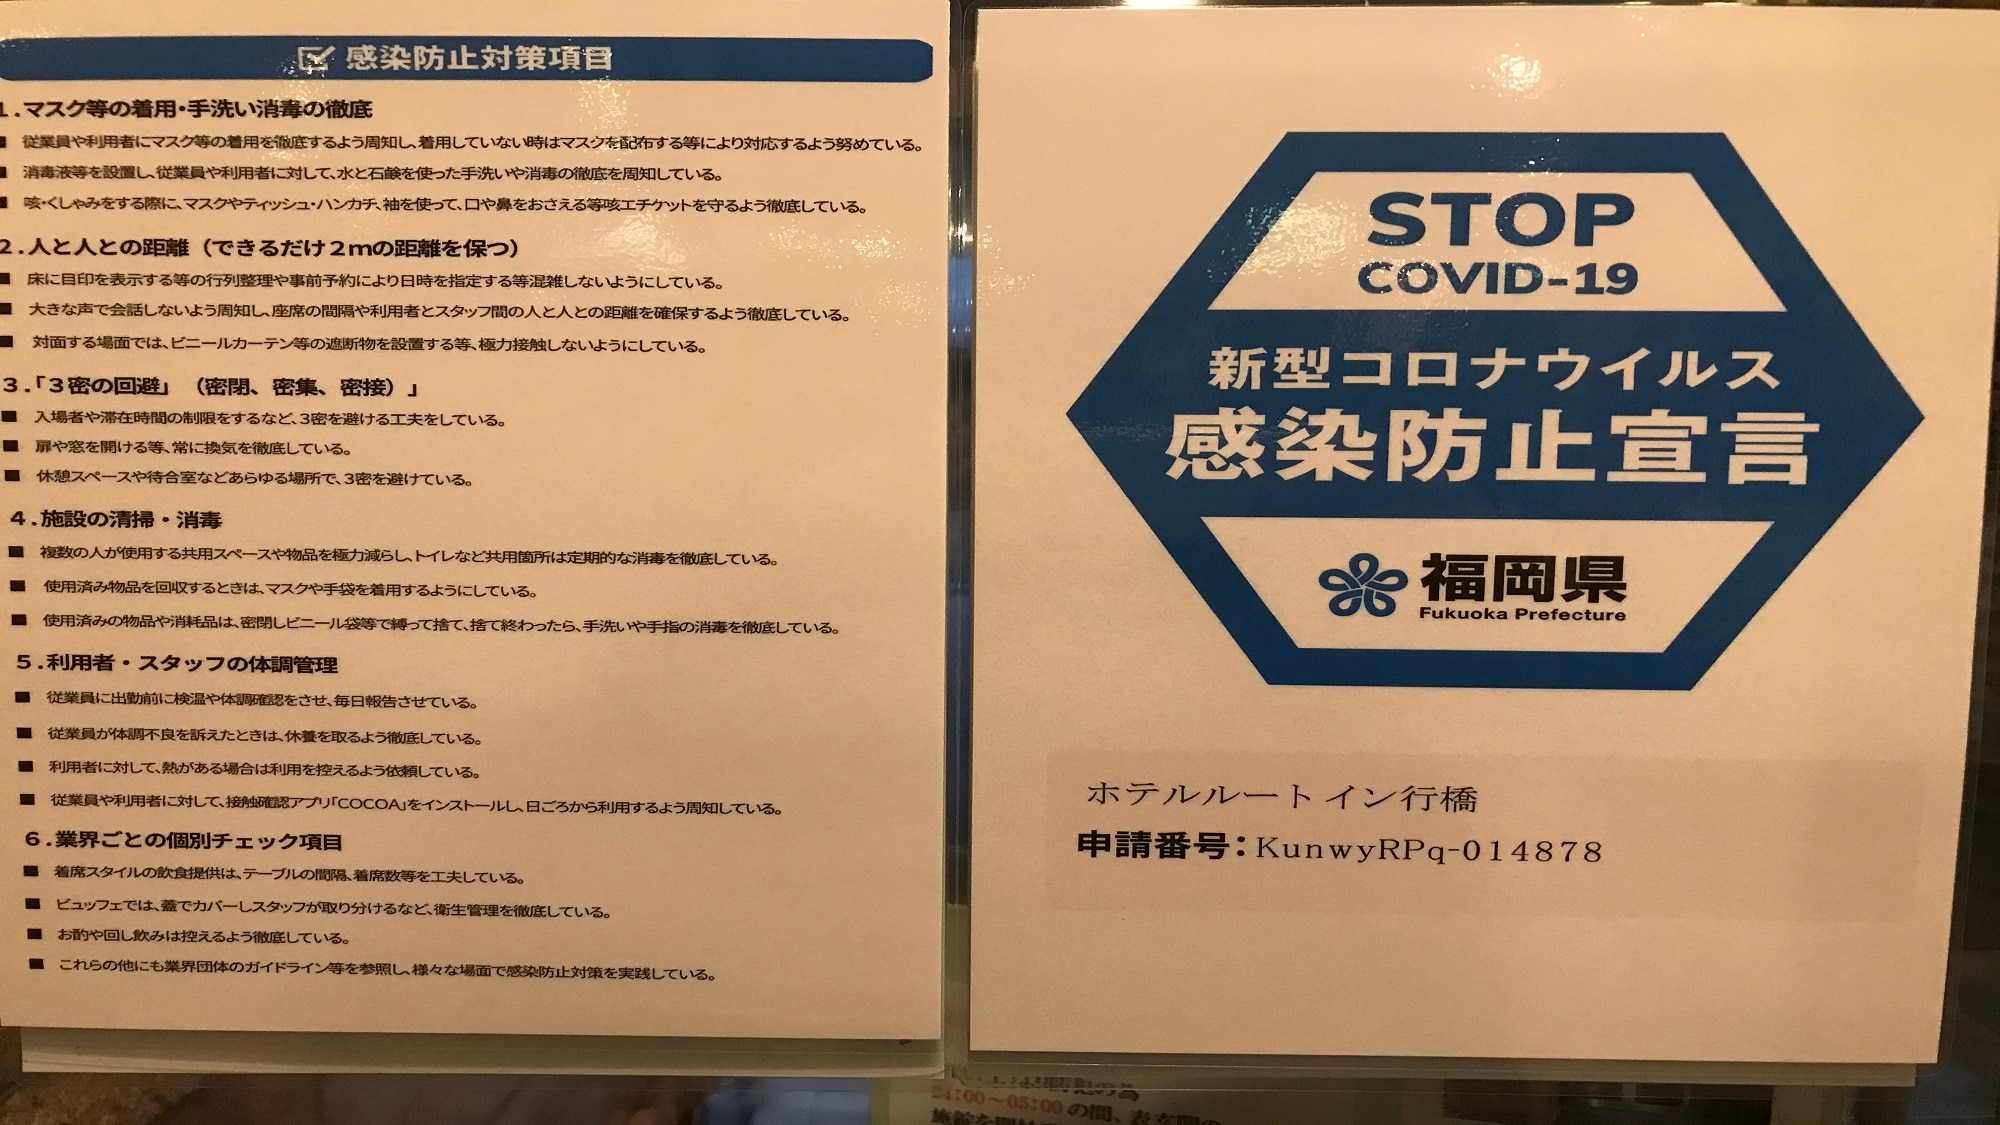 Our hotel is implementing measures to prevent infection with the new coronavirus in Fukuoka Prefecture.